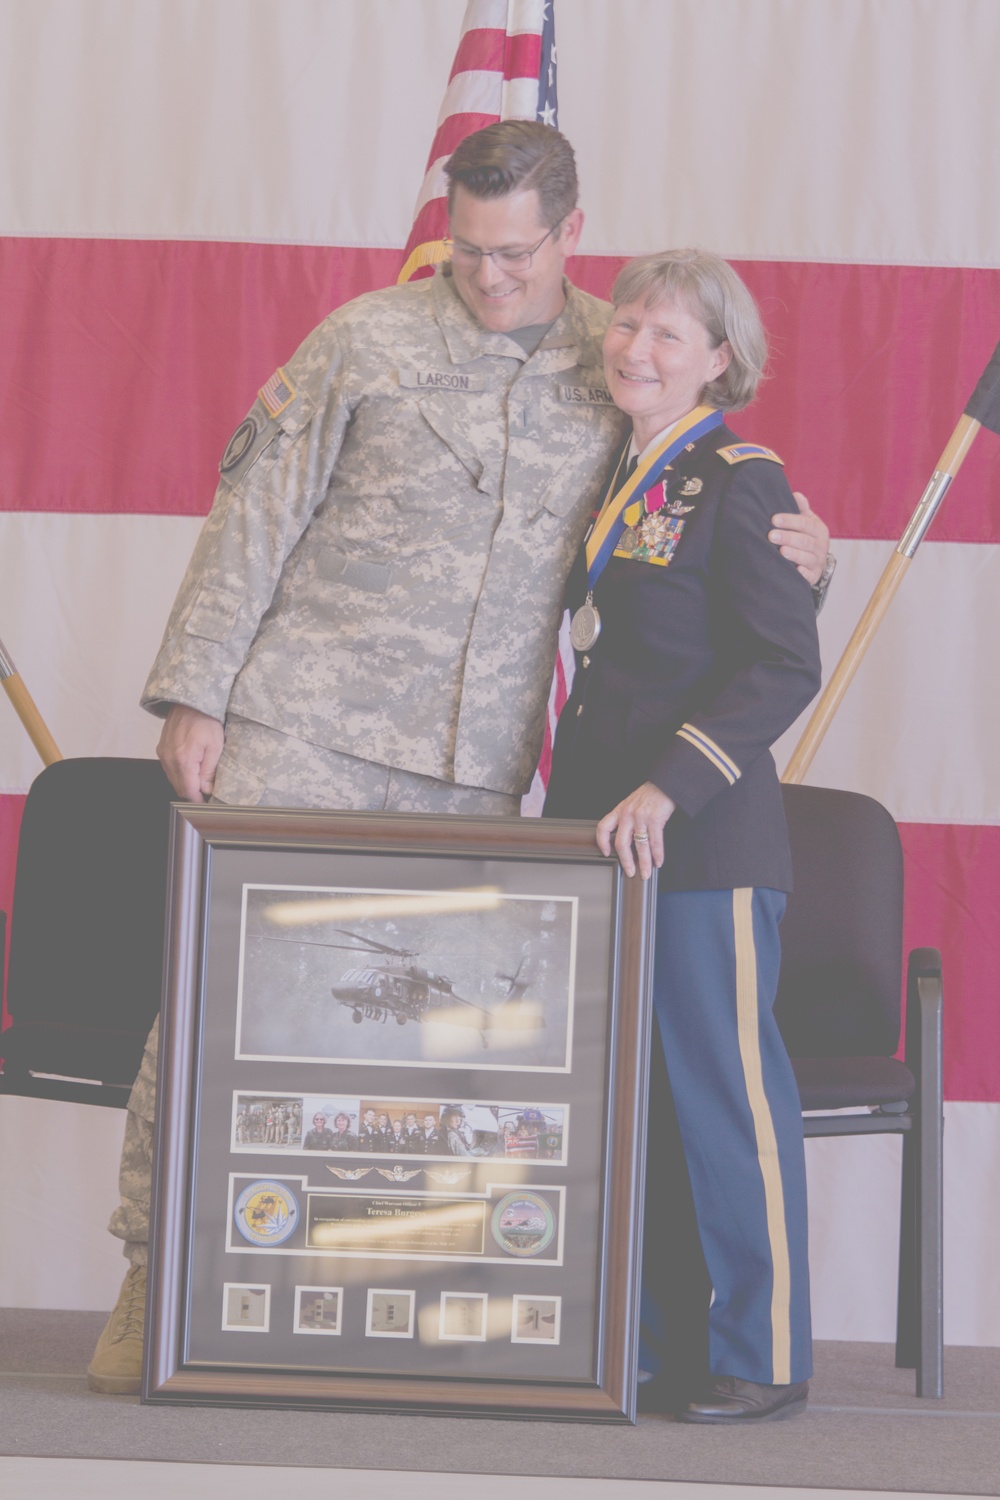 Command Chief Warrant Officer retires after 35 years